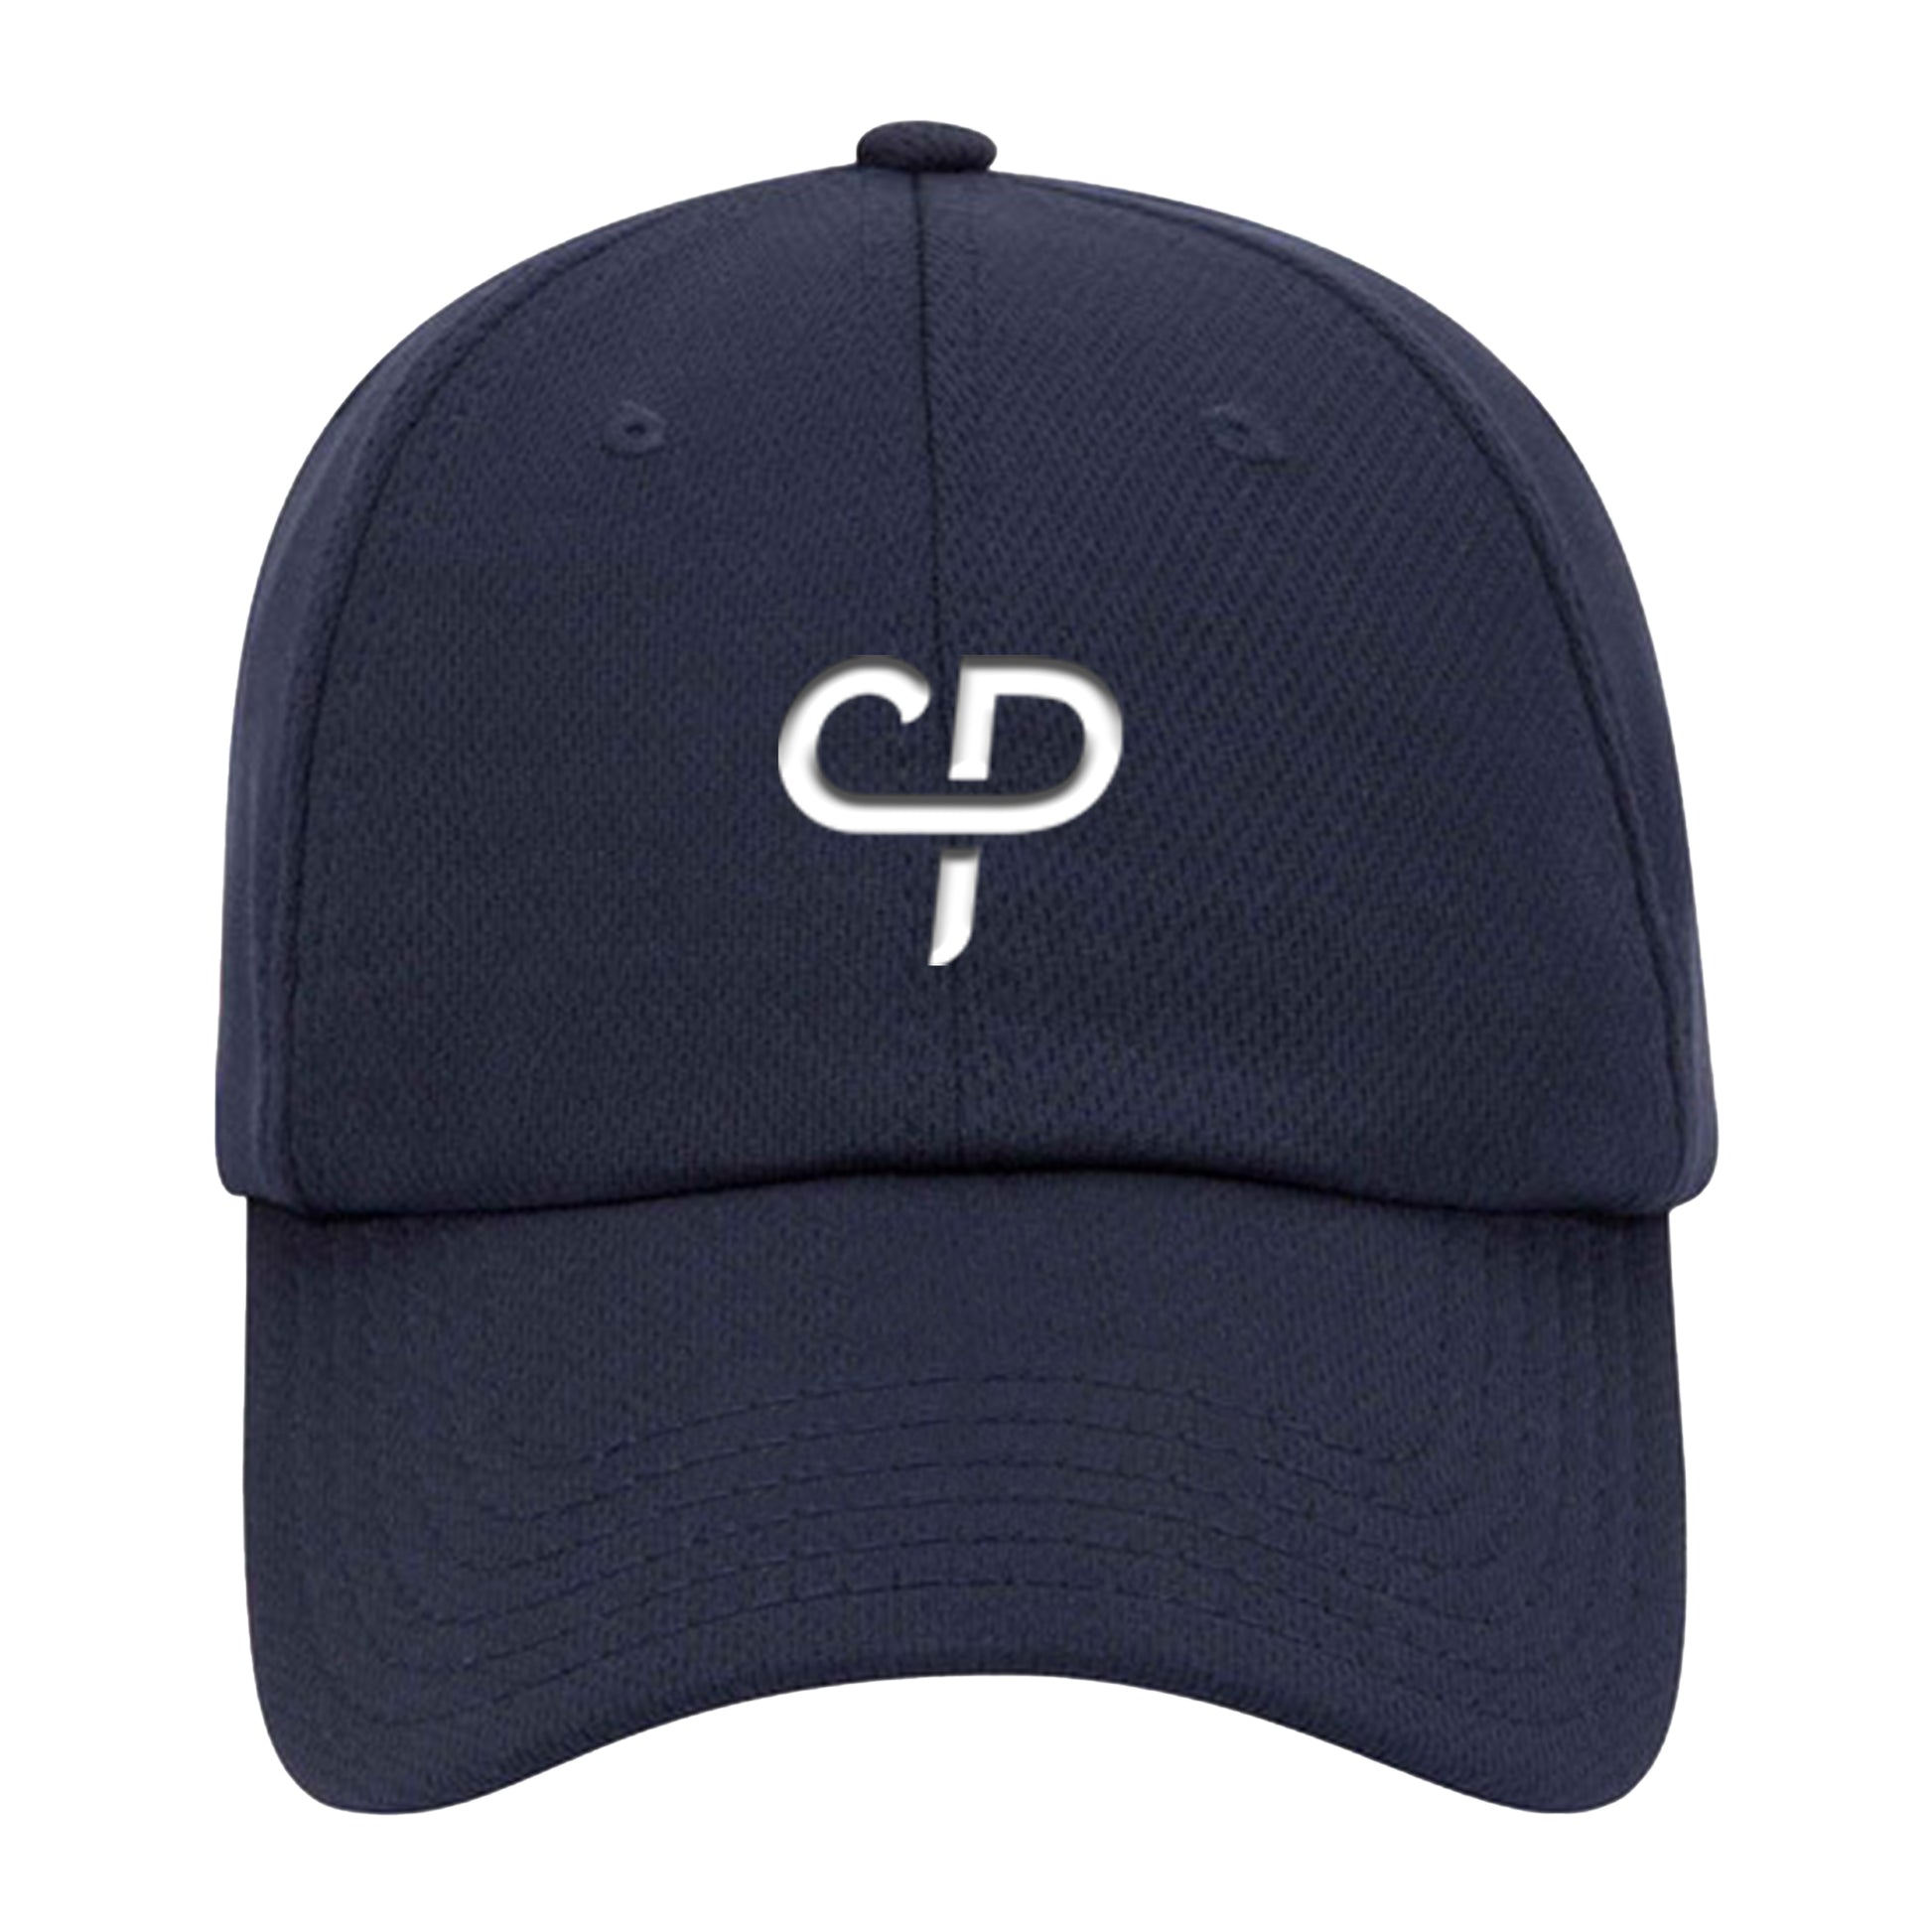 CP Parenteau 6 panel pickleball athletic performance hat in navy blue front view